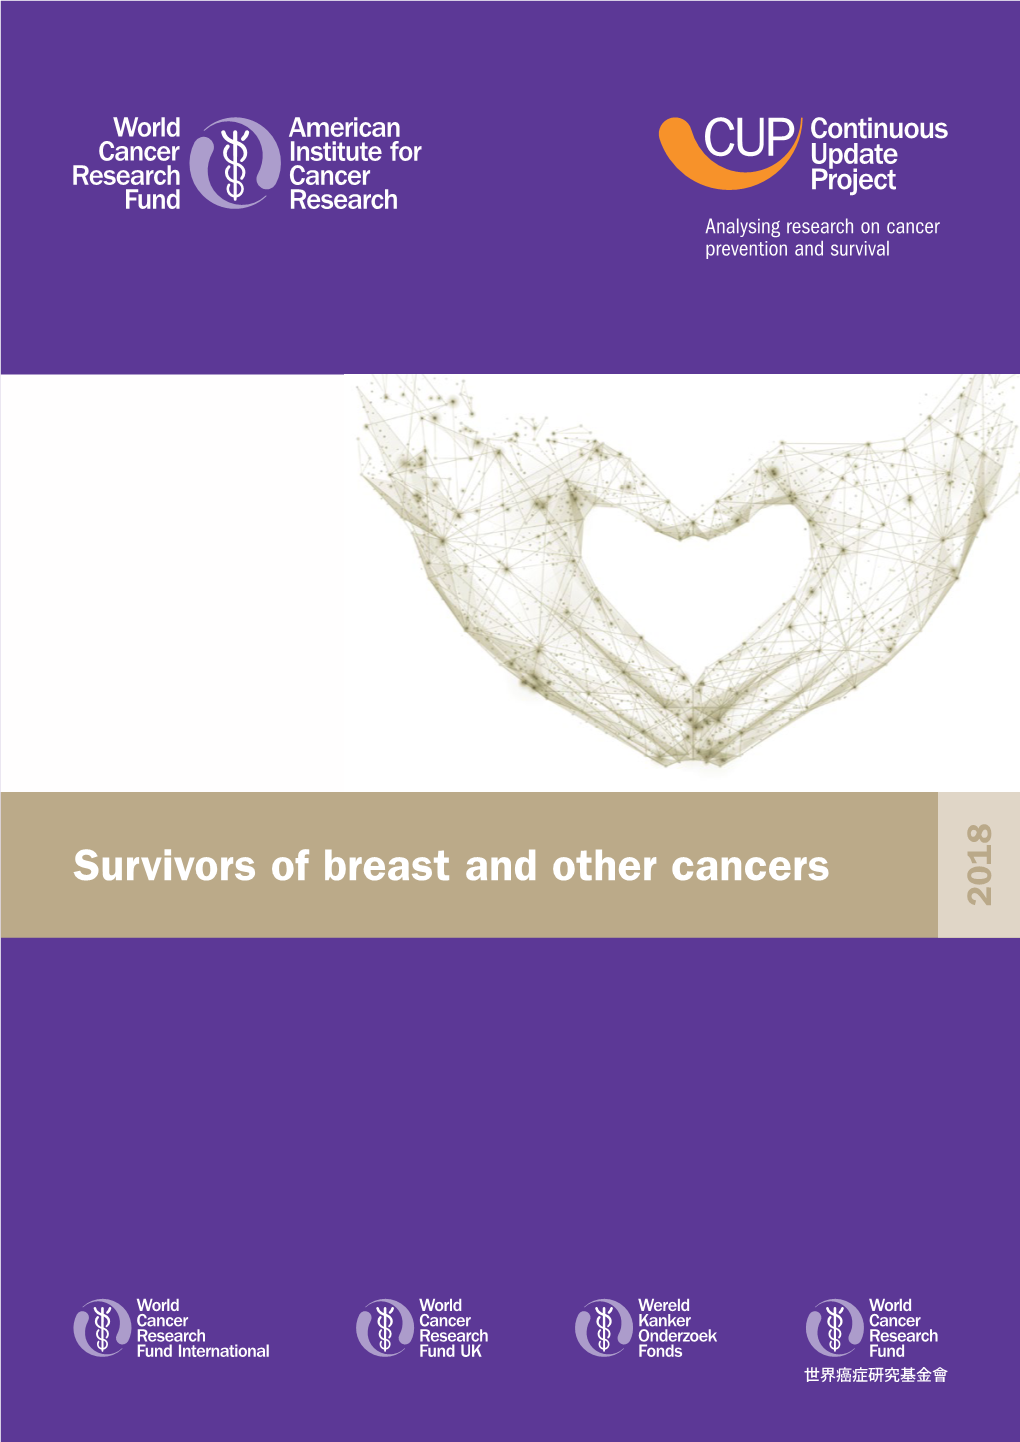 Survivors of Breast and Other Cancers 2018 Contents World Cancer Research Fund Network 3 Introduction 5 1